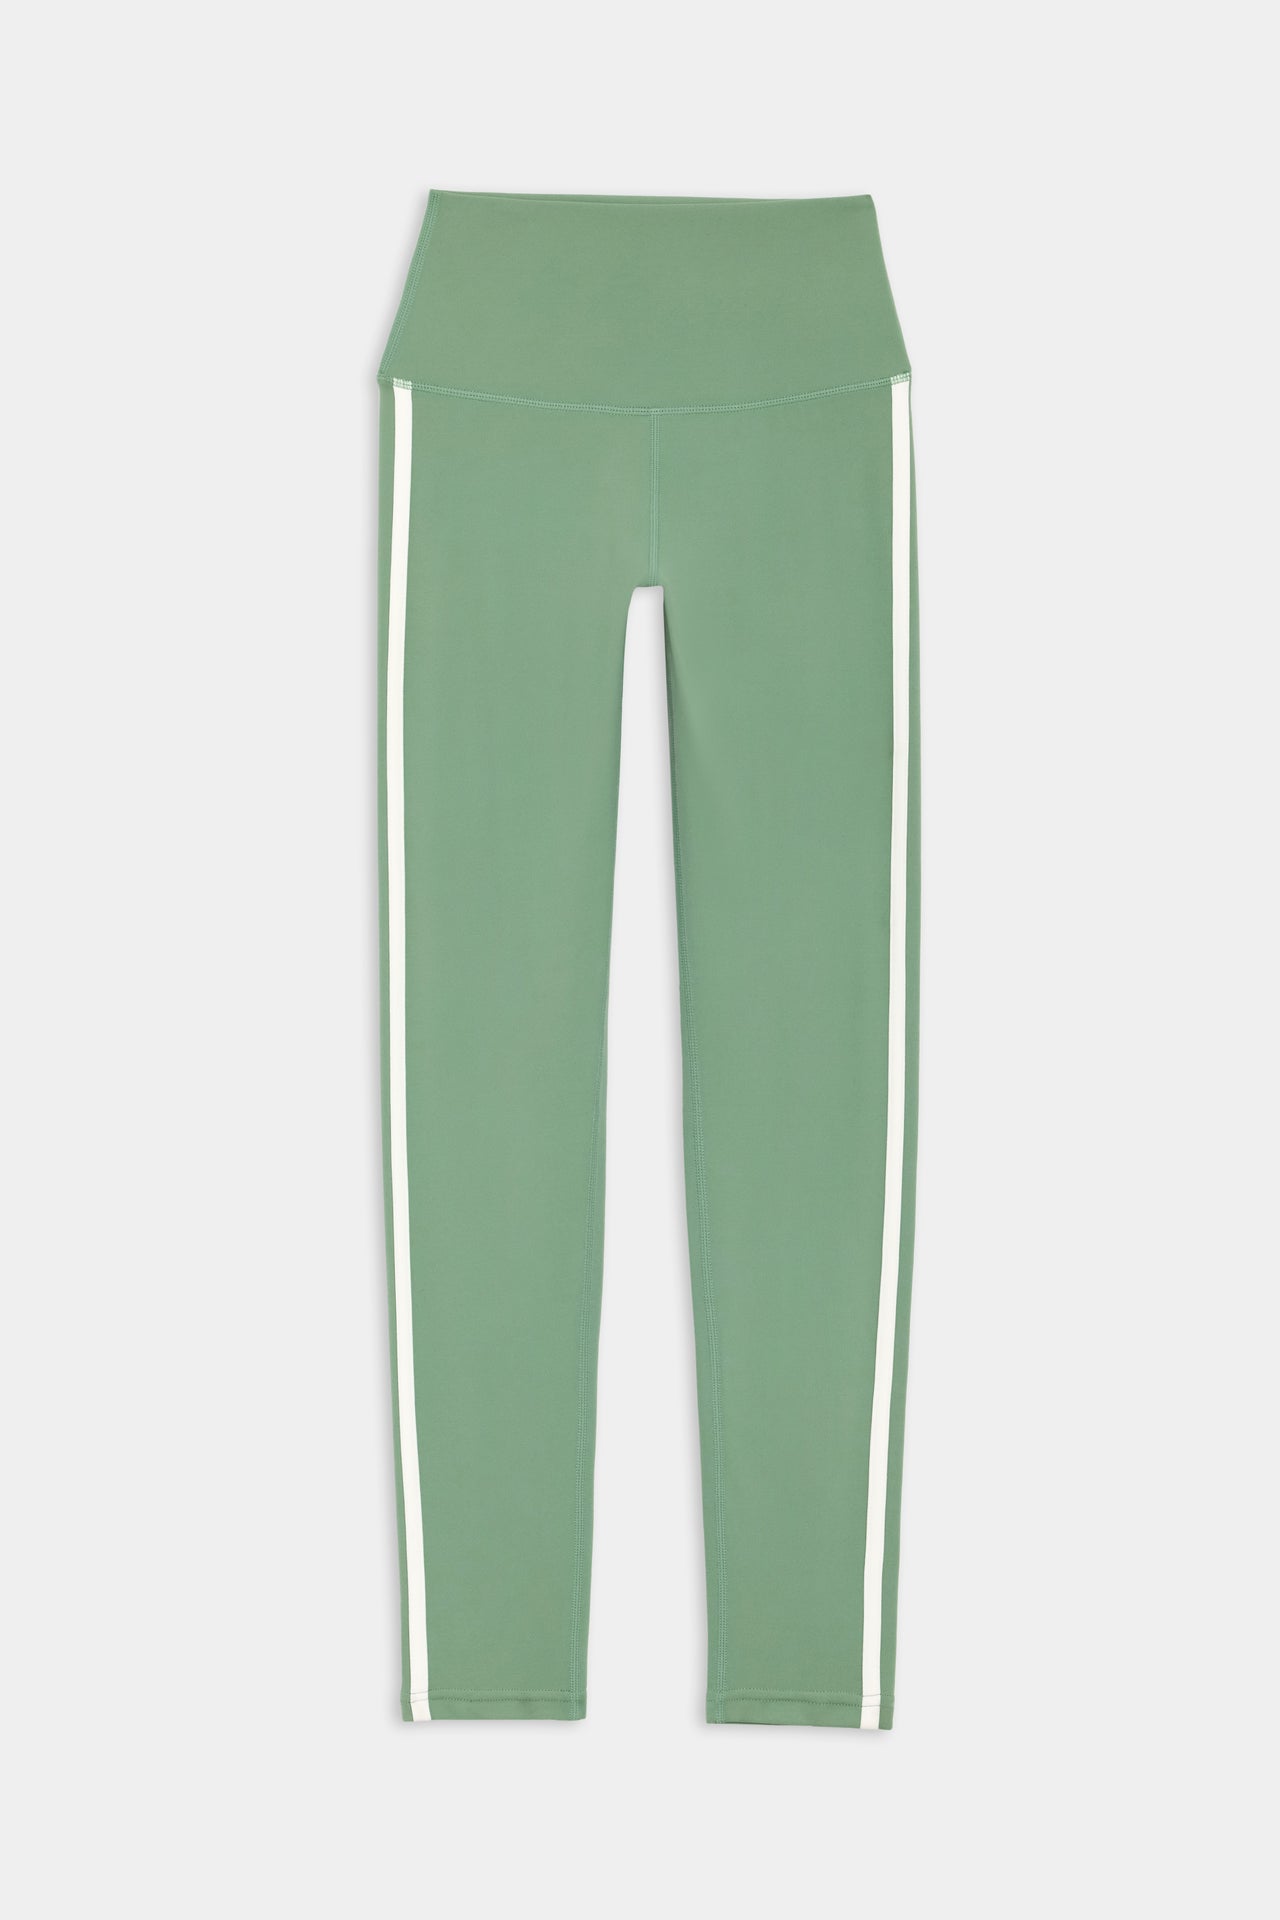 Flat view of light green leggings with two white stripes down the side